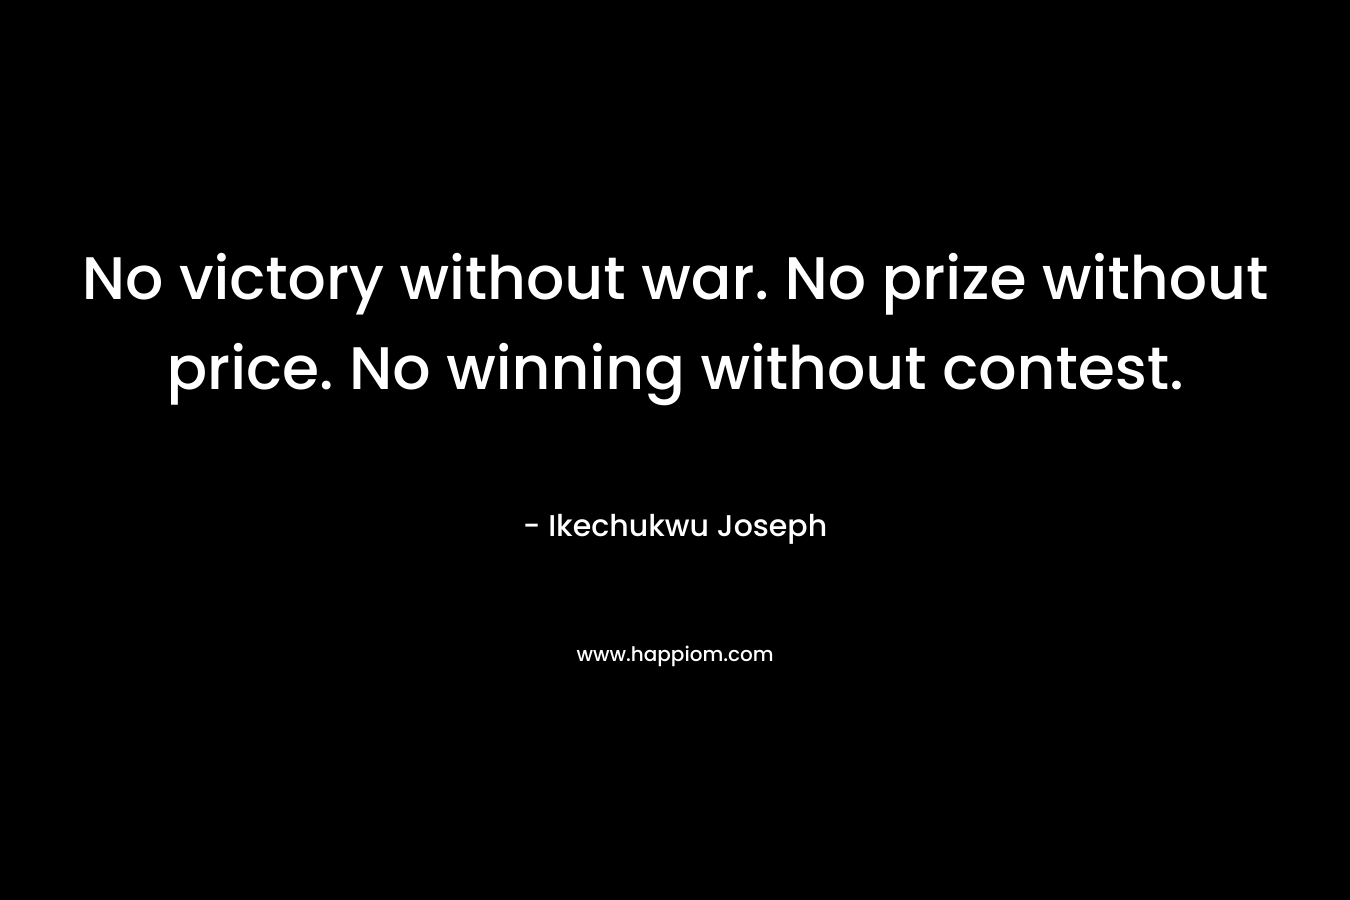 No victory without war. No prize without price. No winning without contest. – Ikechukwu Joseph